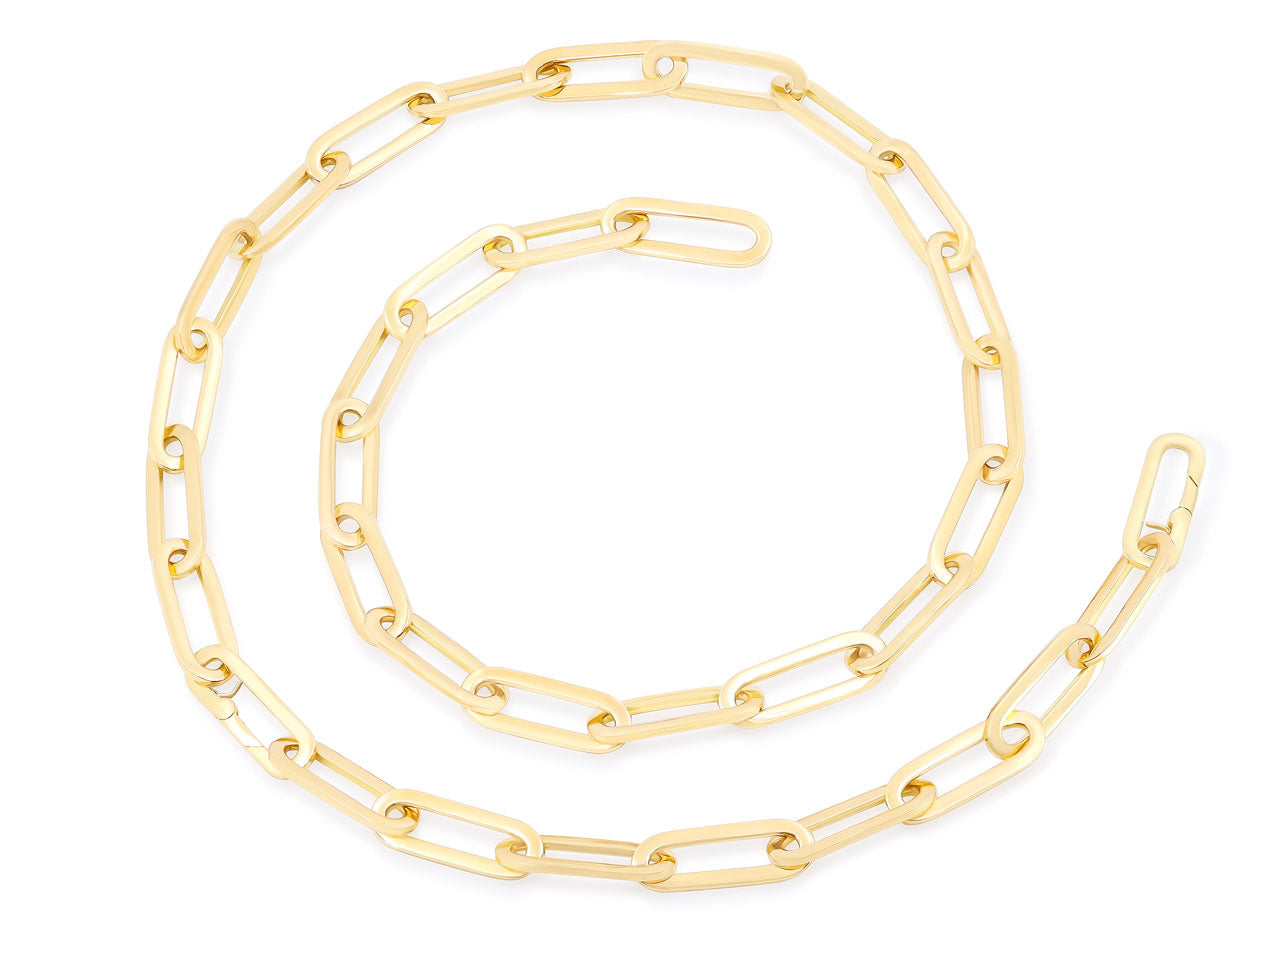 Italian 'Paperclip' Elongated Link Necklace in 18K Gold, by Beladora